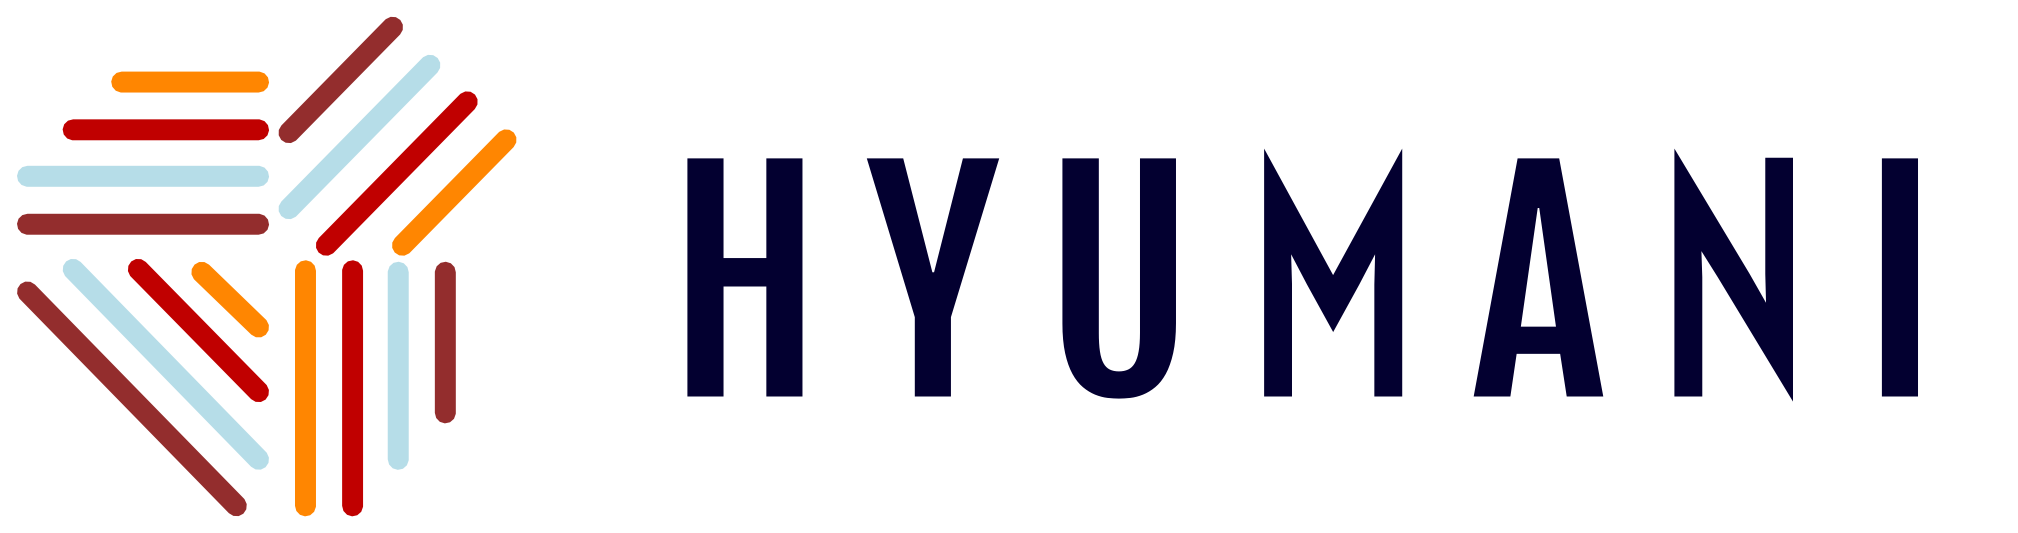 hyumani.com - solution to define human nature and 4 types of leadership styles of leaders